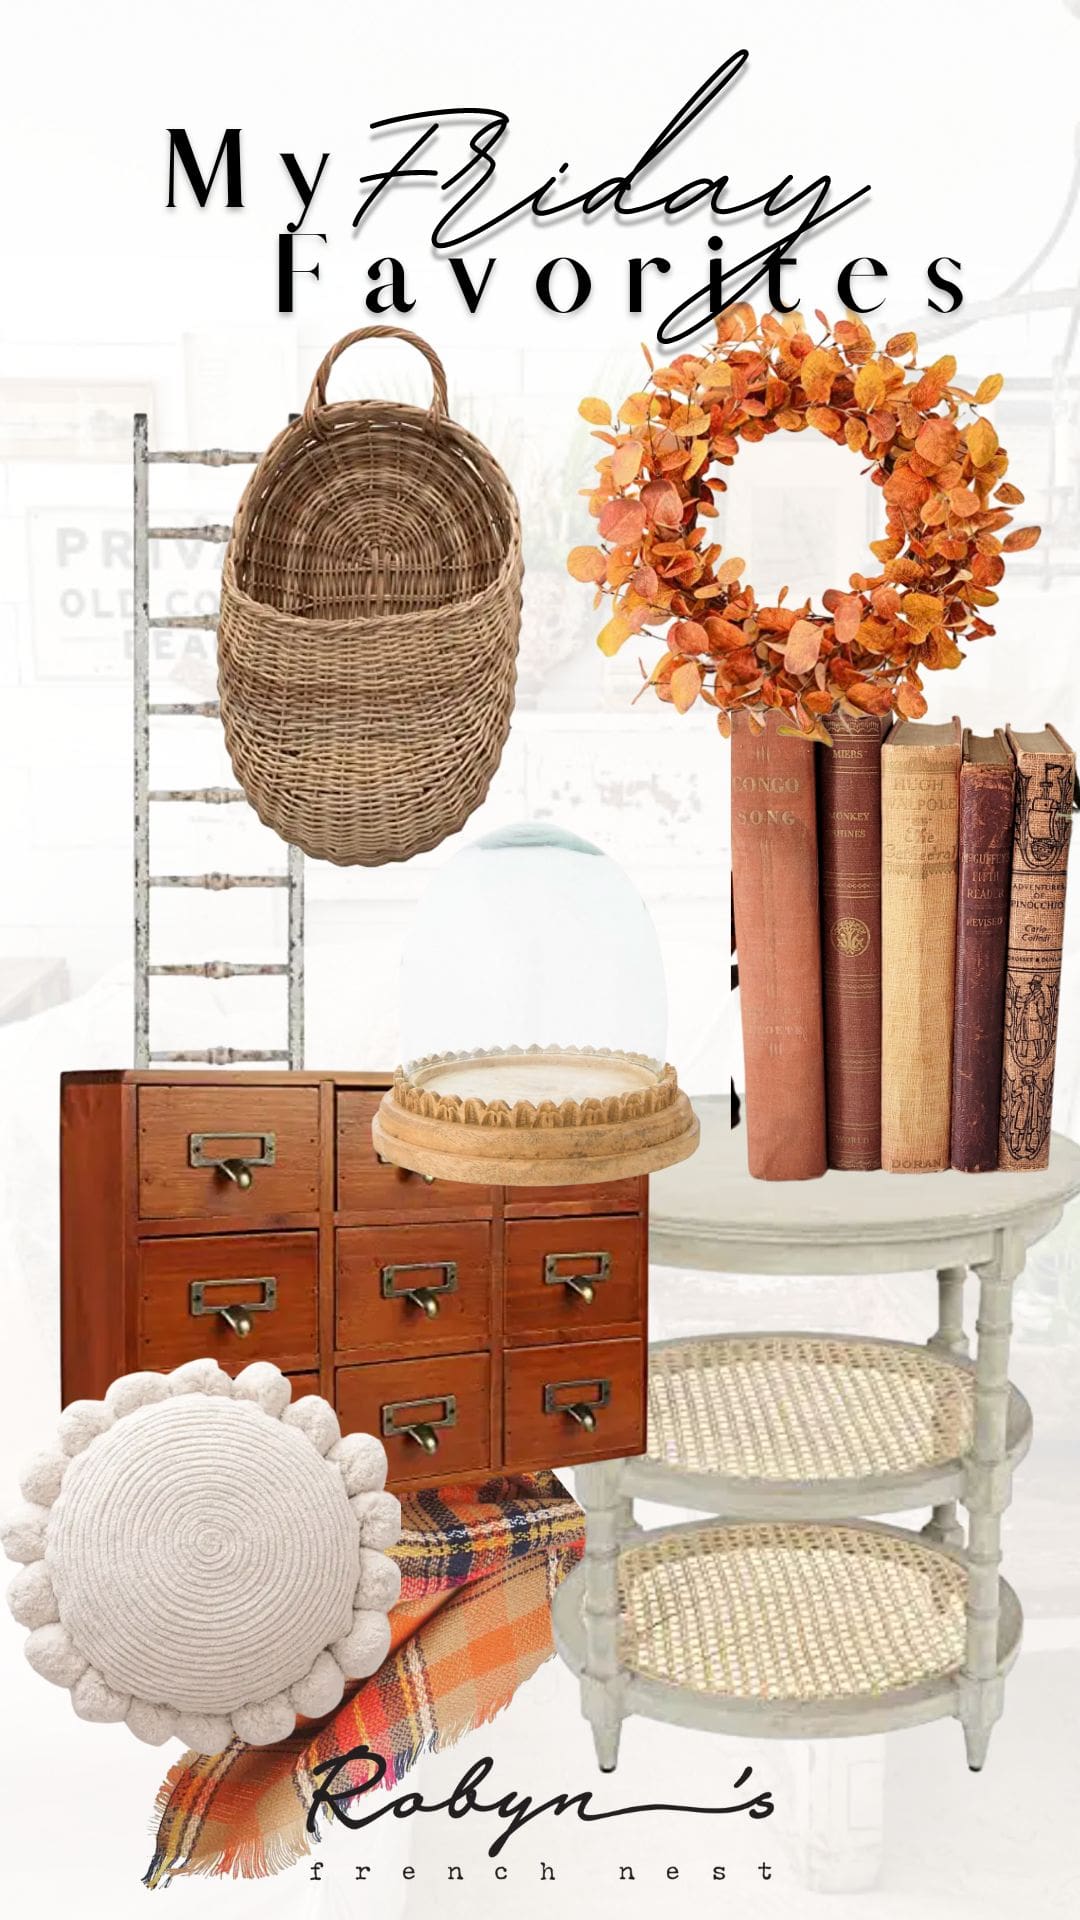 Friday Favorites-Decorating for Fall